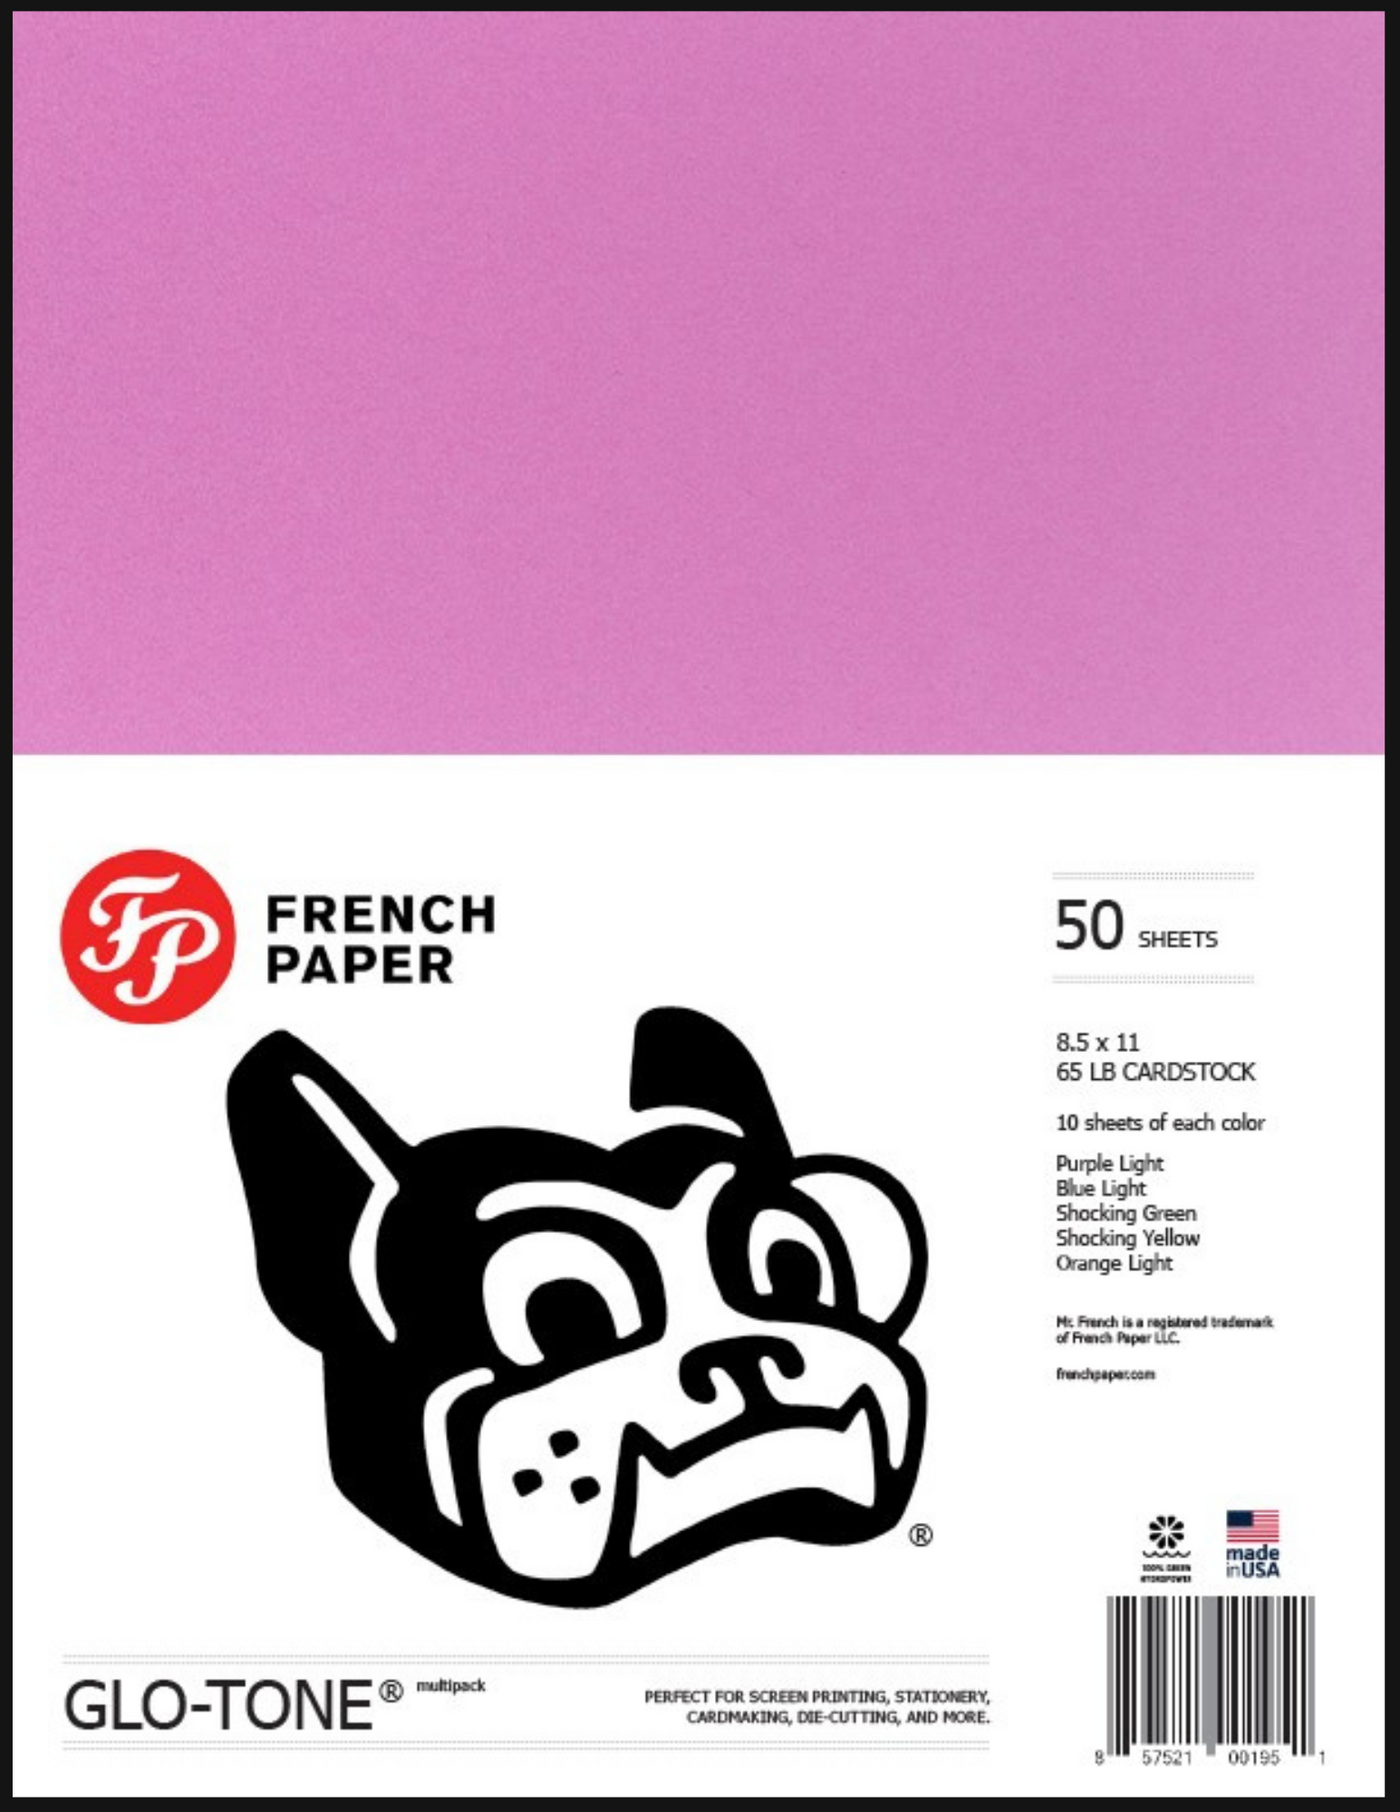 Glo-Tone Multipack – French Paper